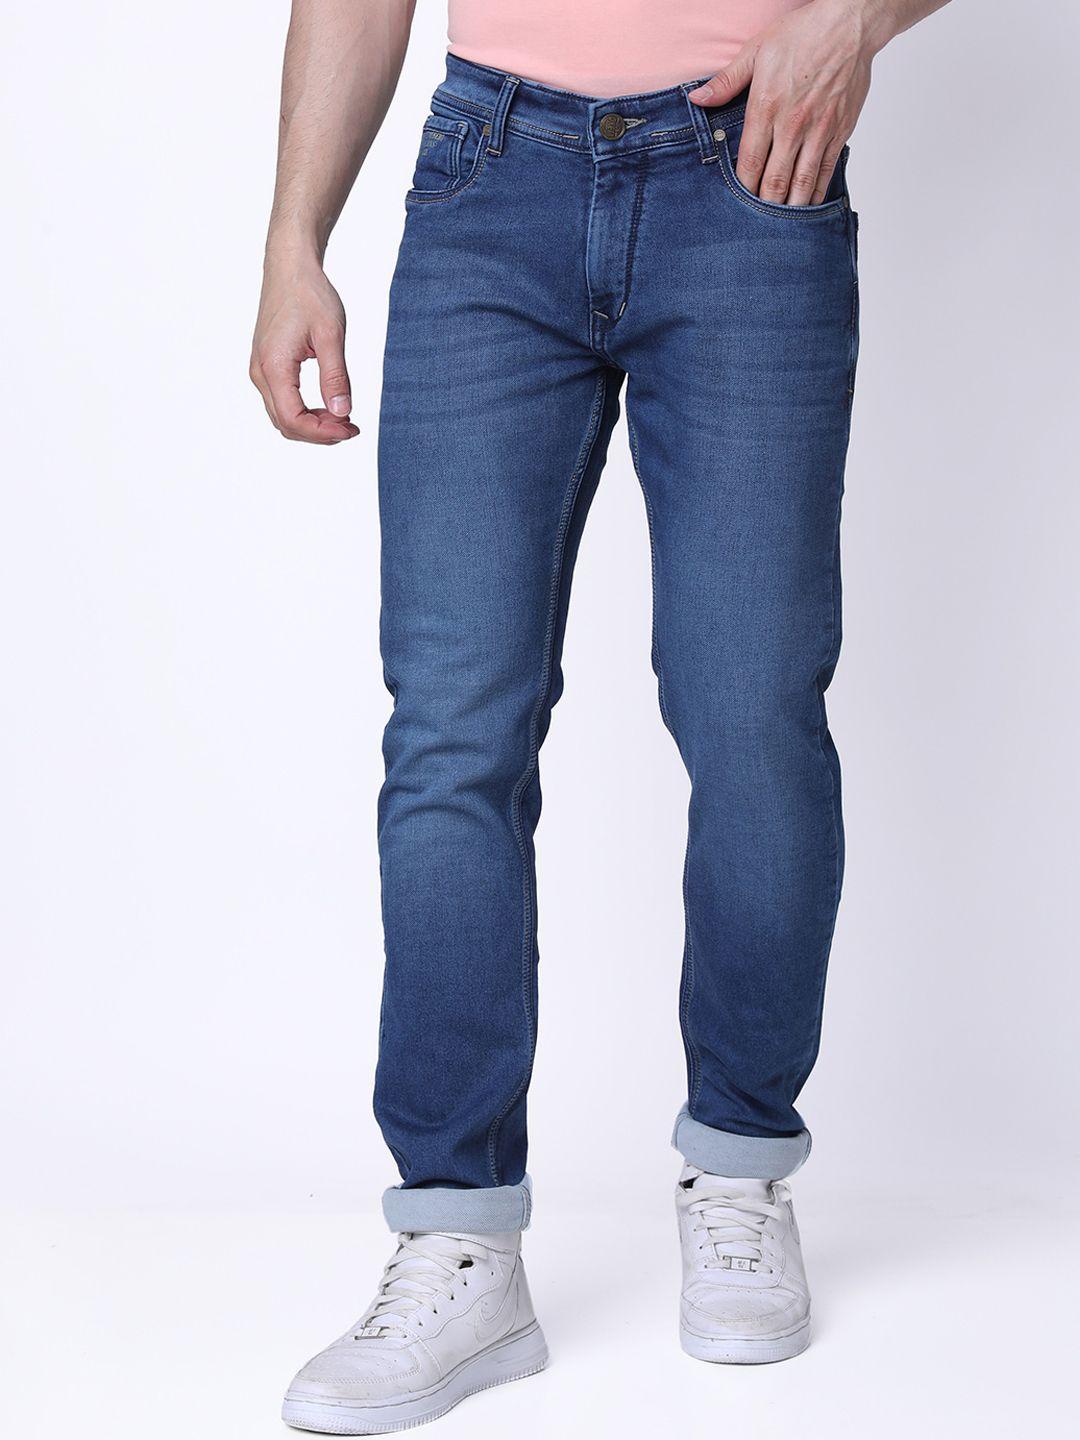 oxemberg-lean-men-slim-fit-mid-rise-light-fade-clean-look-stretchable-jeans